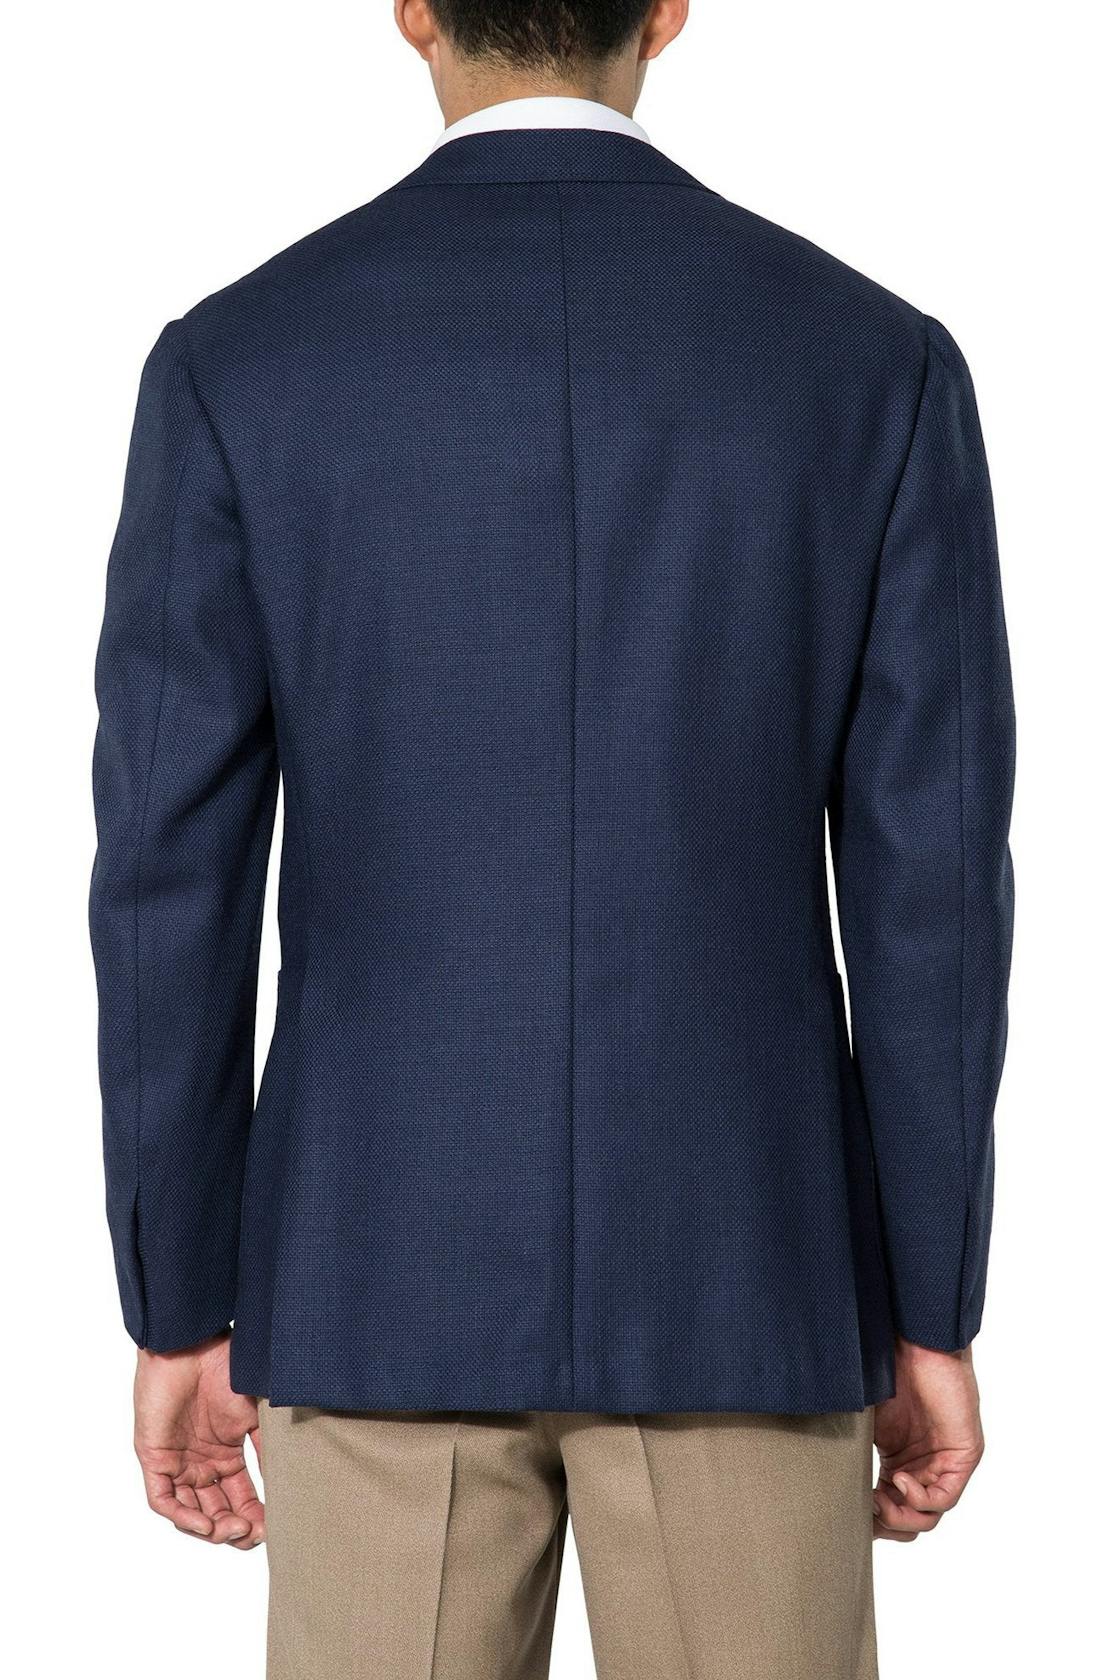 The Armoury by Ring Jacket Model 3 Blue Wool Balloon Sport Coat